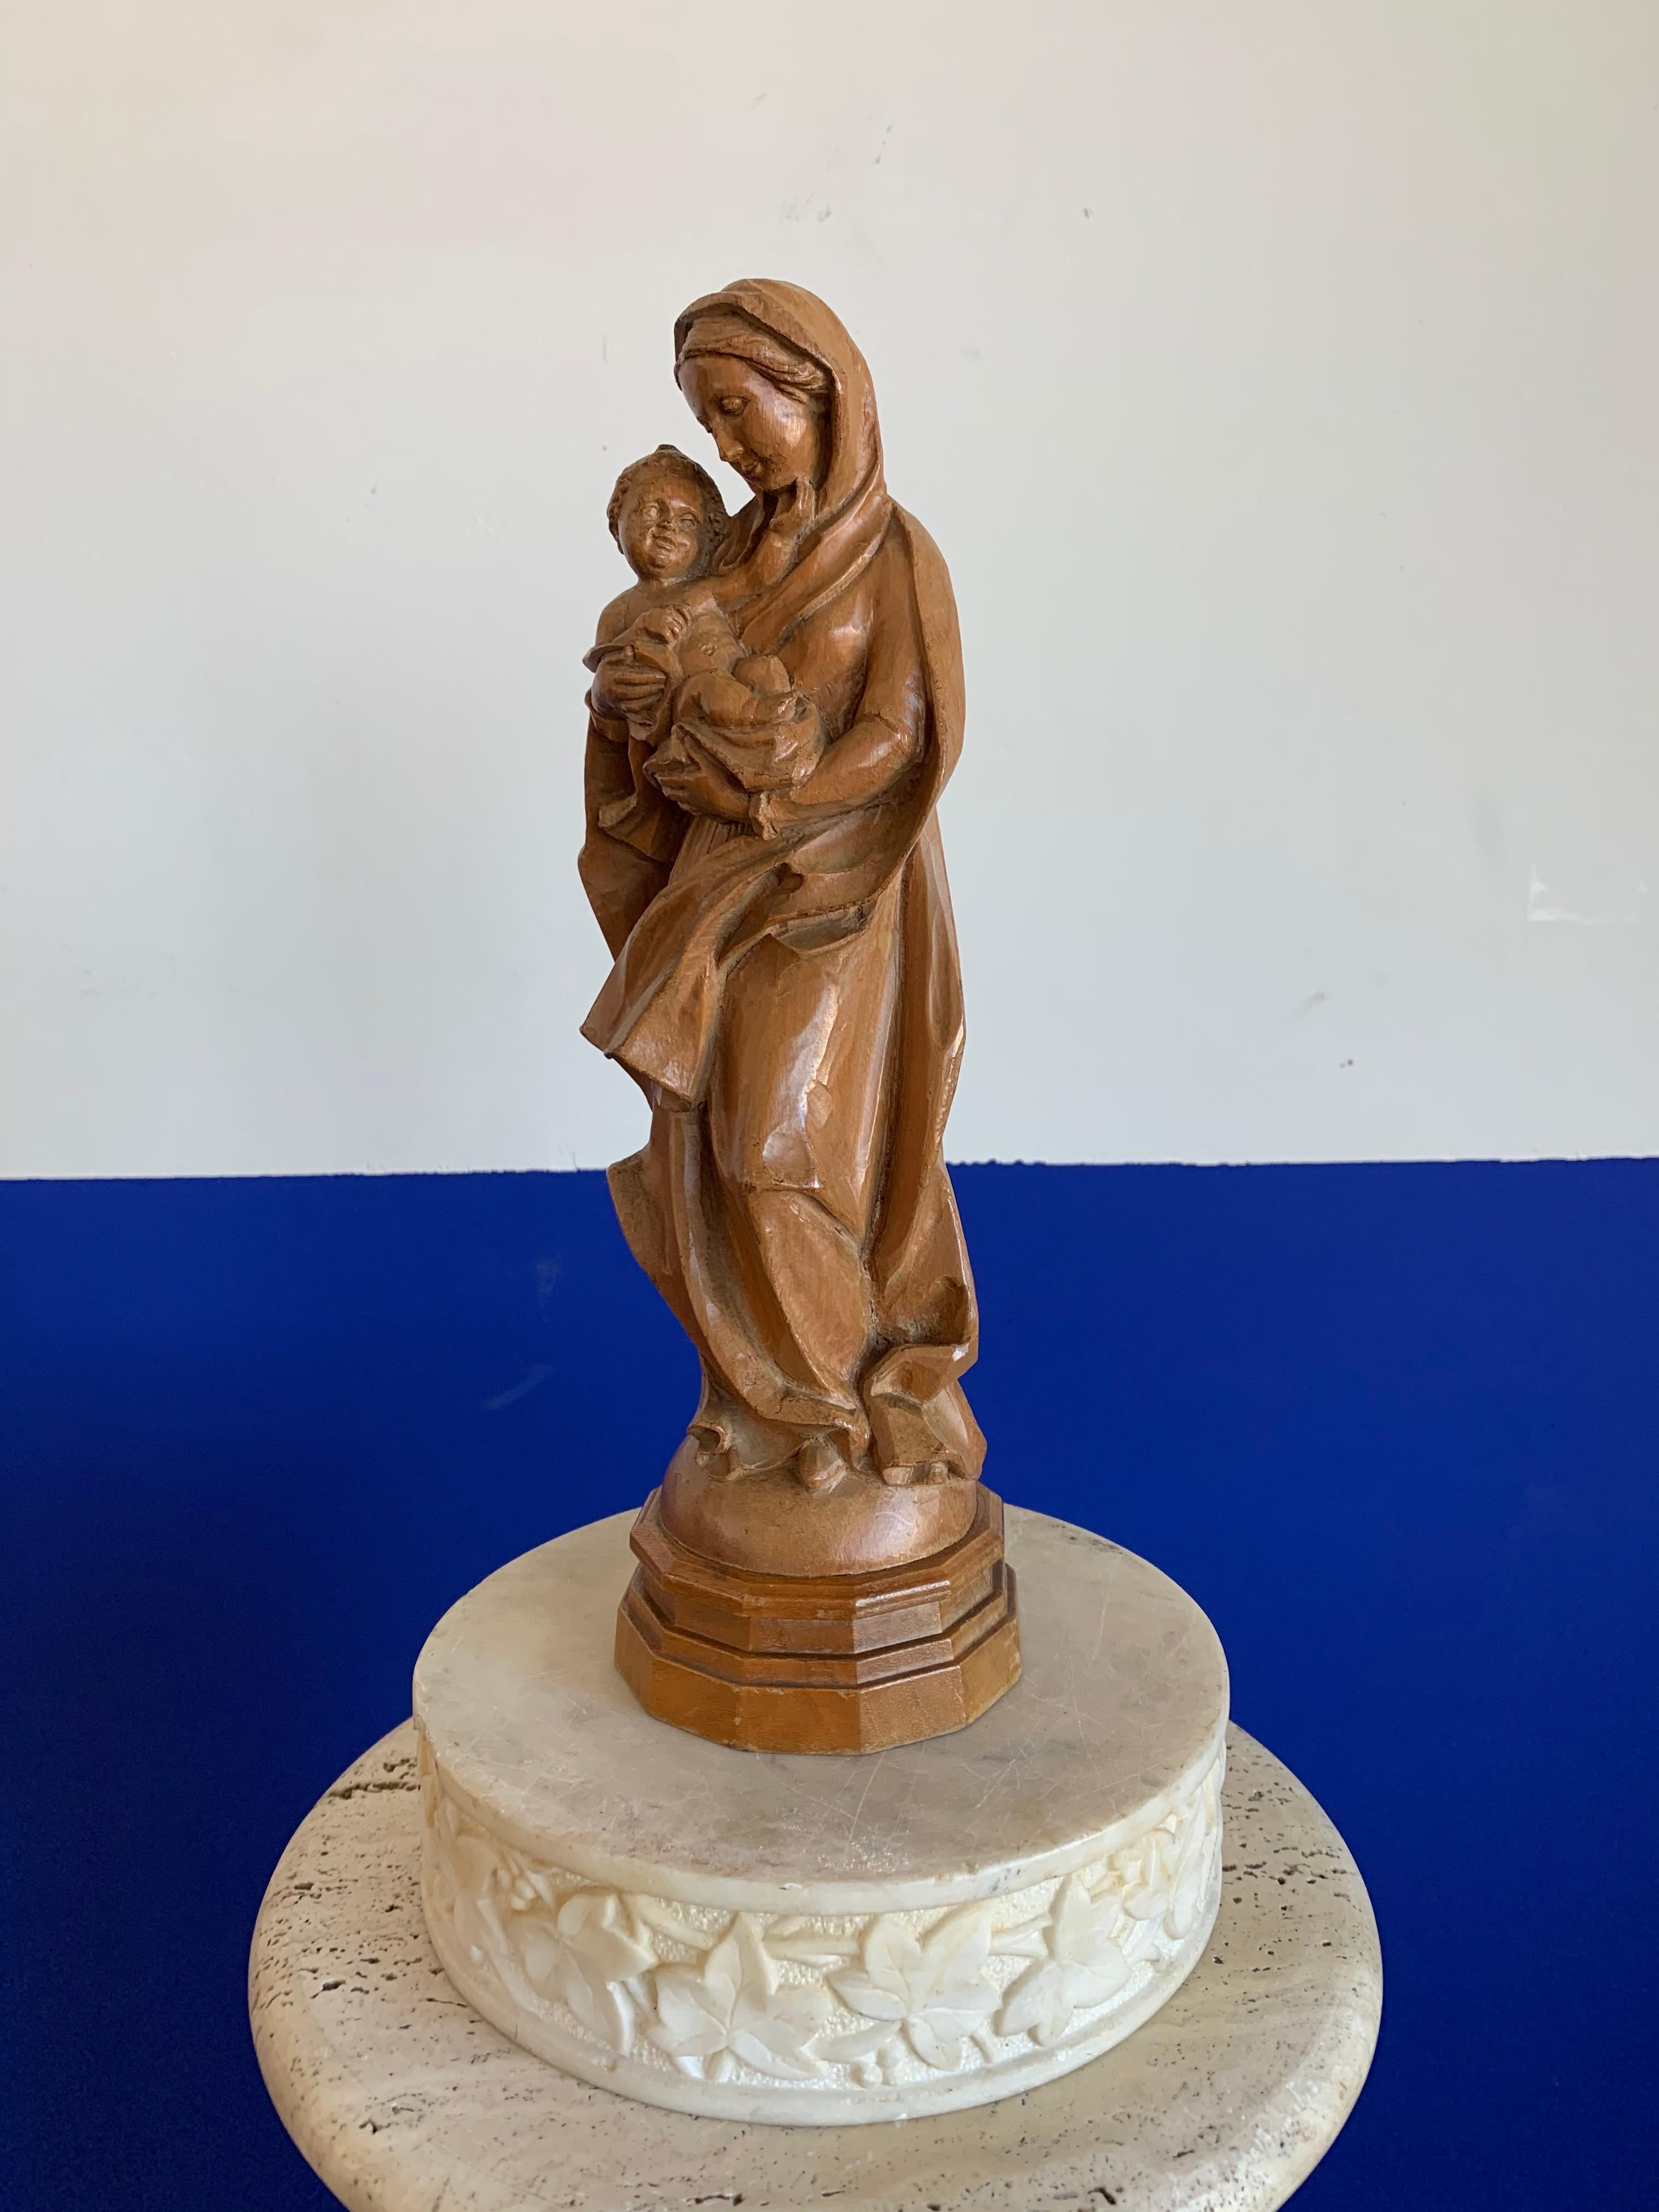 European Finest Quality Carved, Baroque Style Statuette of Holy Mary Holding Baby Jesus